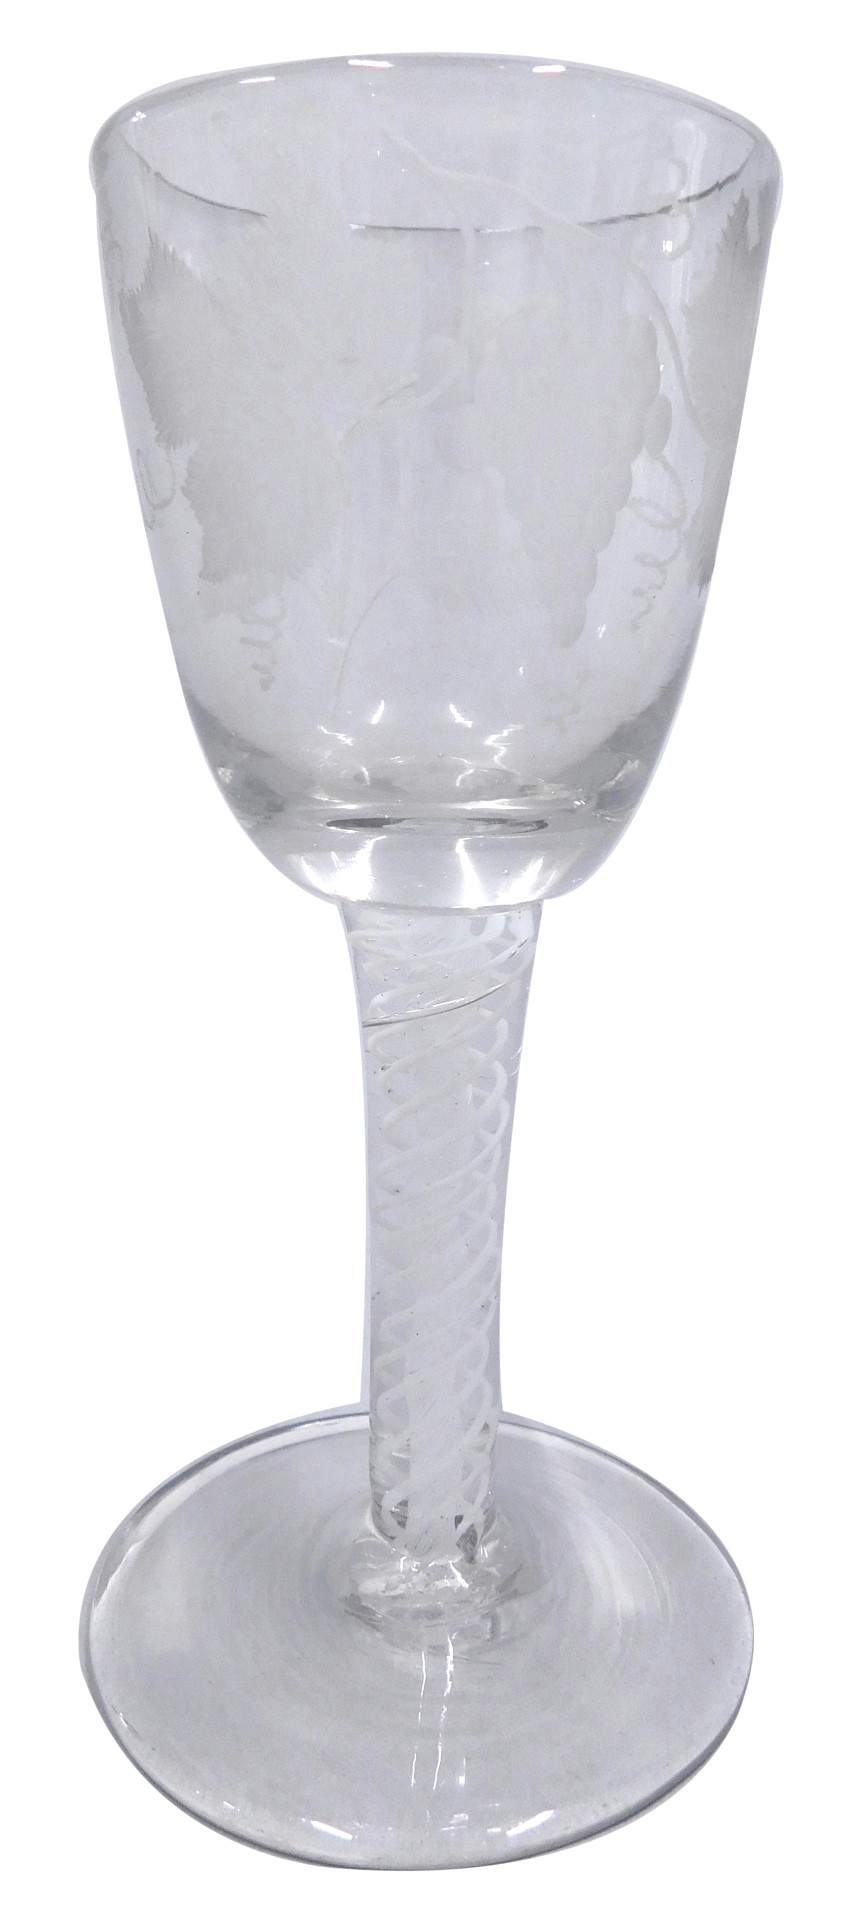 An 18thC wine glass, the bell shaped bowl engraved with grapes and vines, with an opaque twist stem